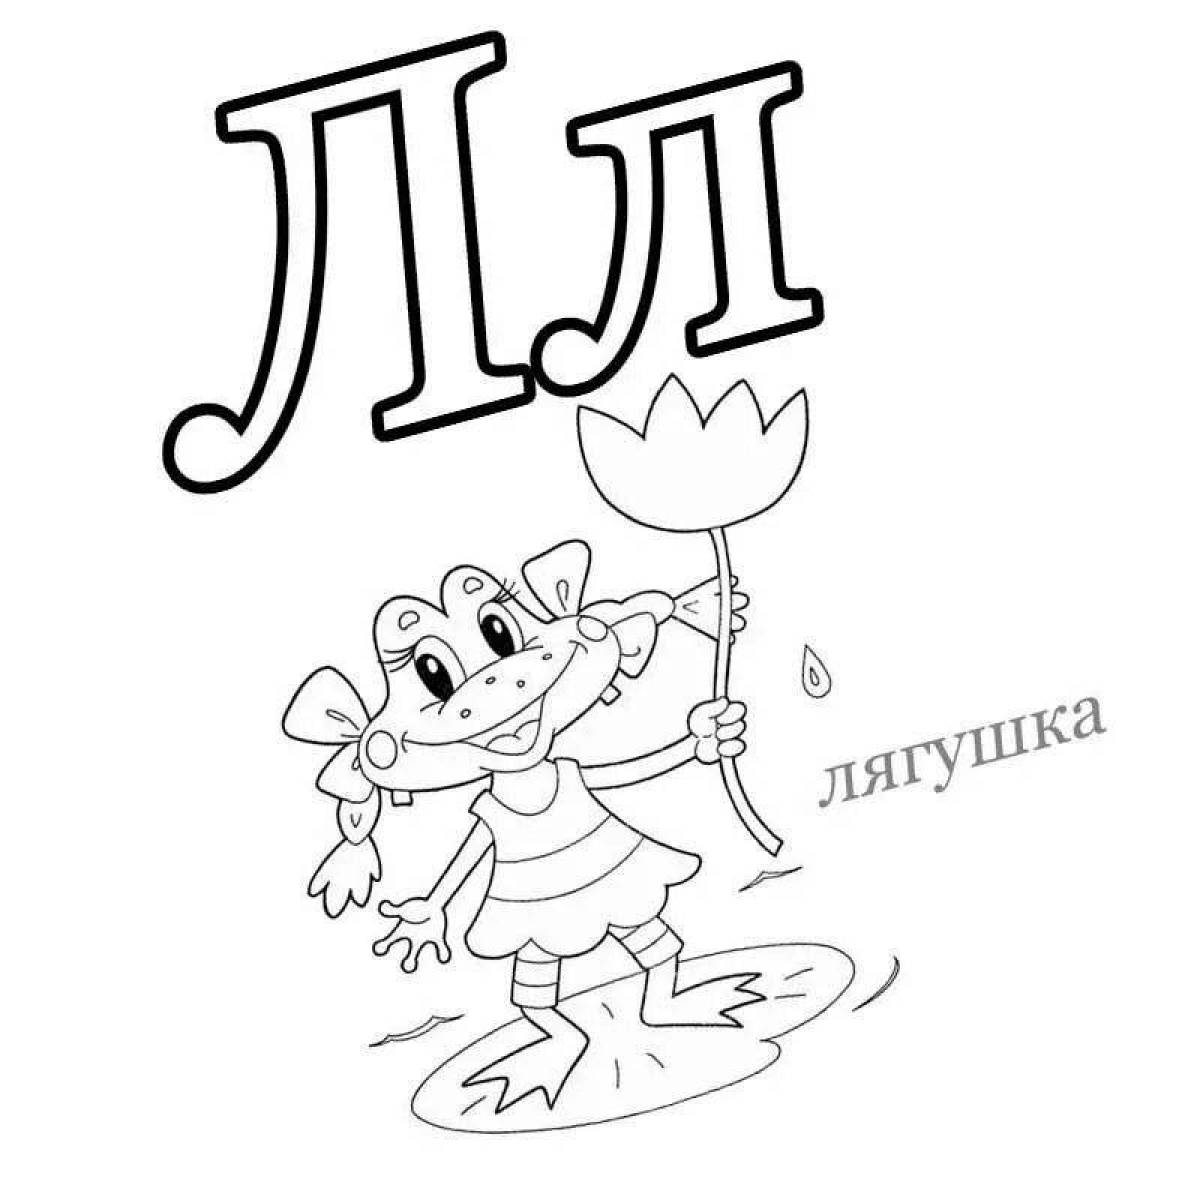 Abc laura adorable coloring page